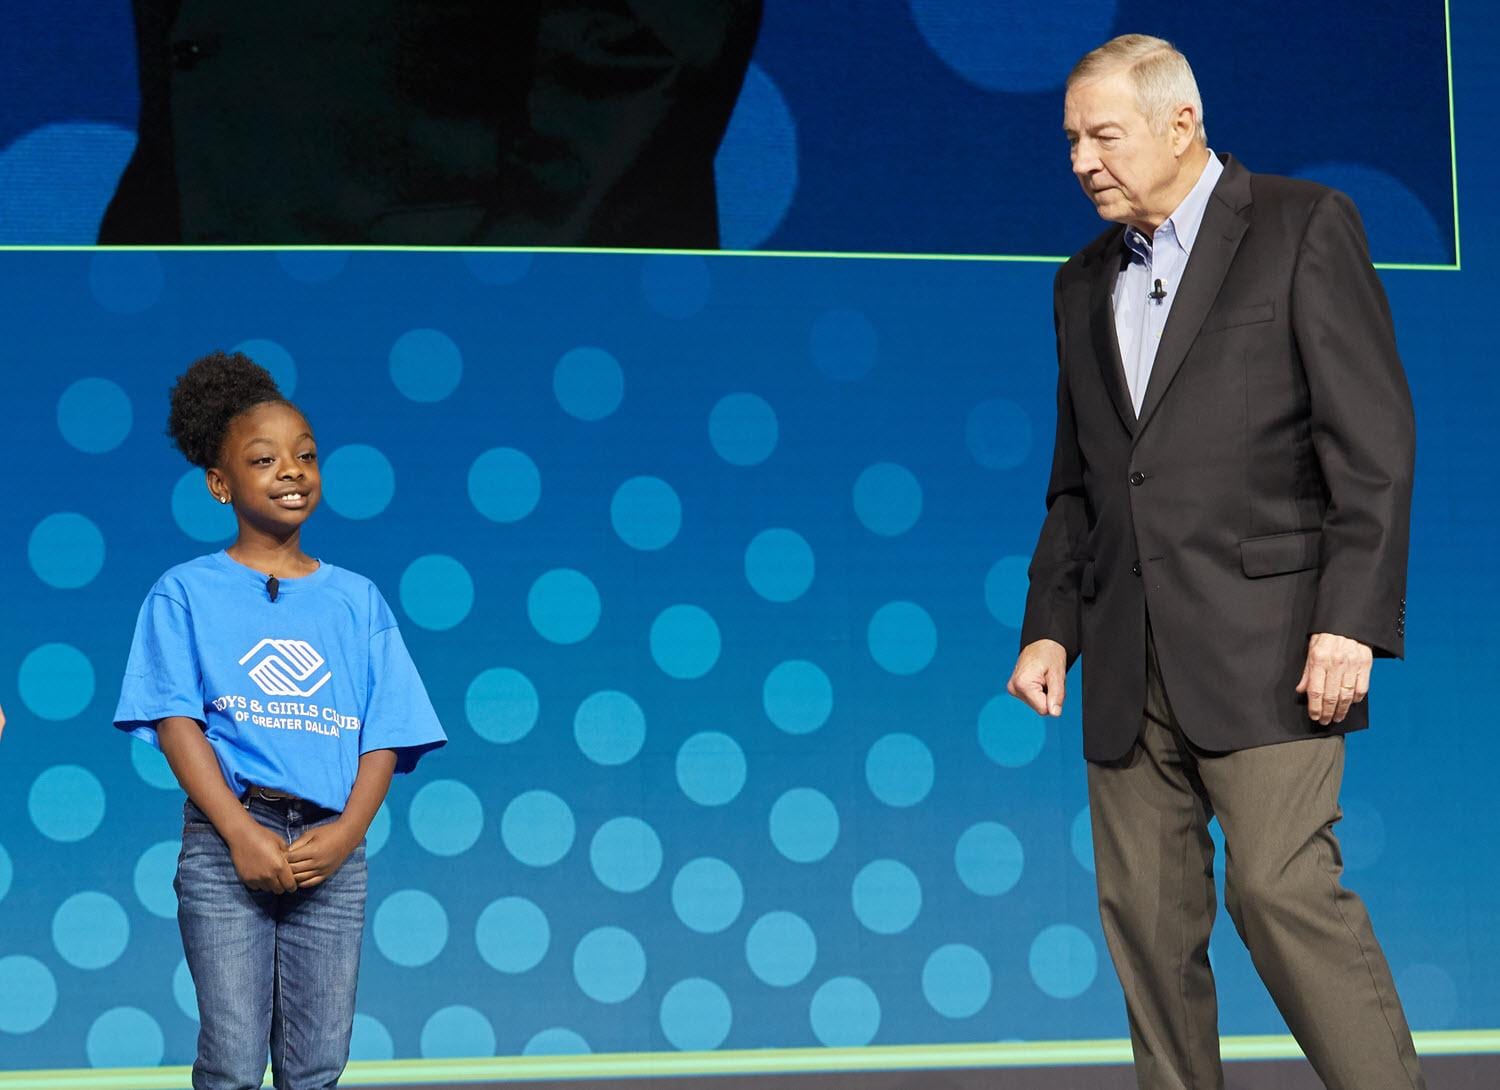 Dr. Jim Goodnight on SAS Global Forum 2019 stage with Jeneah Johnson from Boys and Girls club